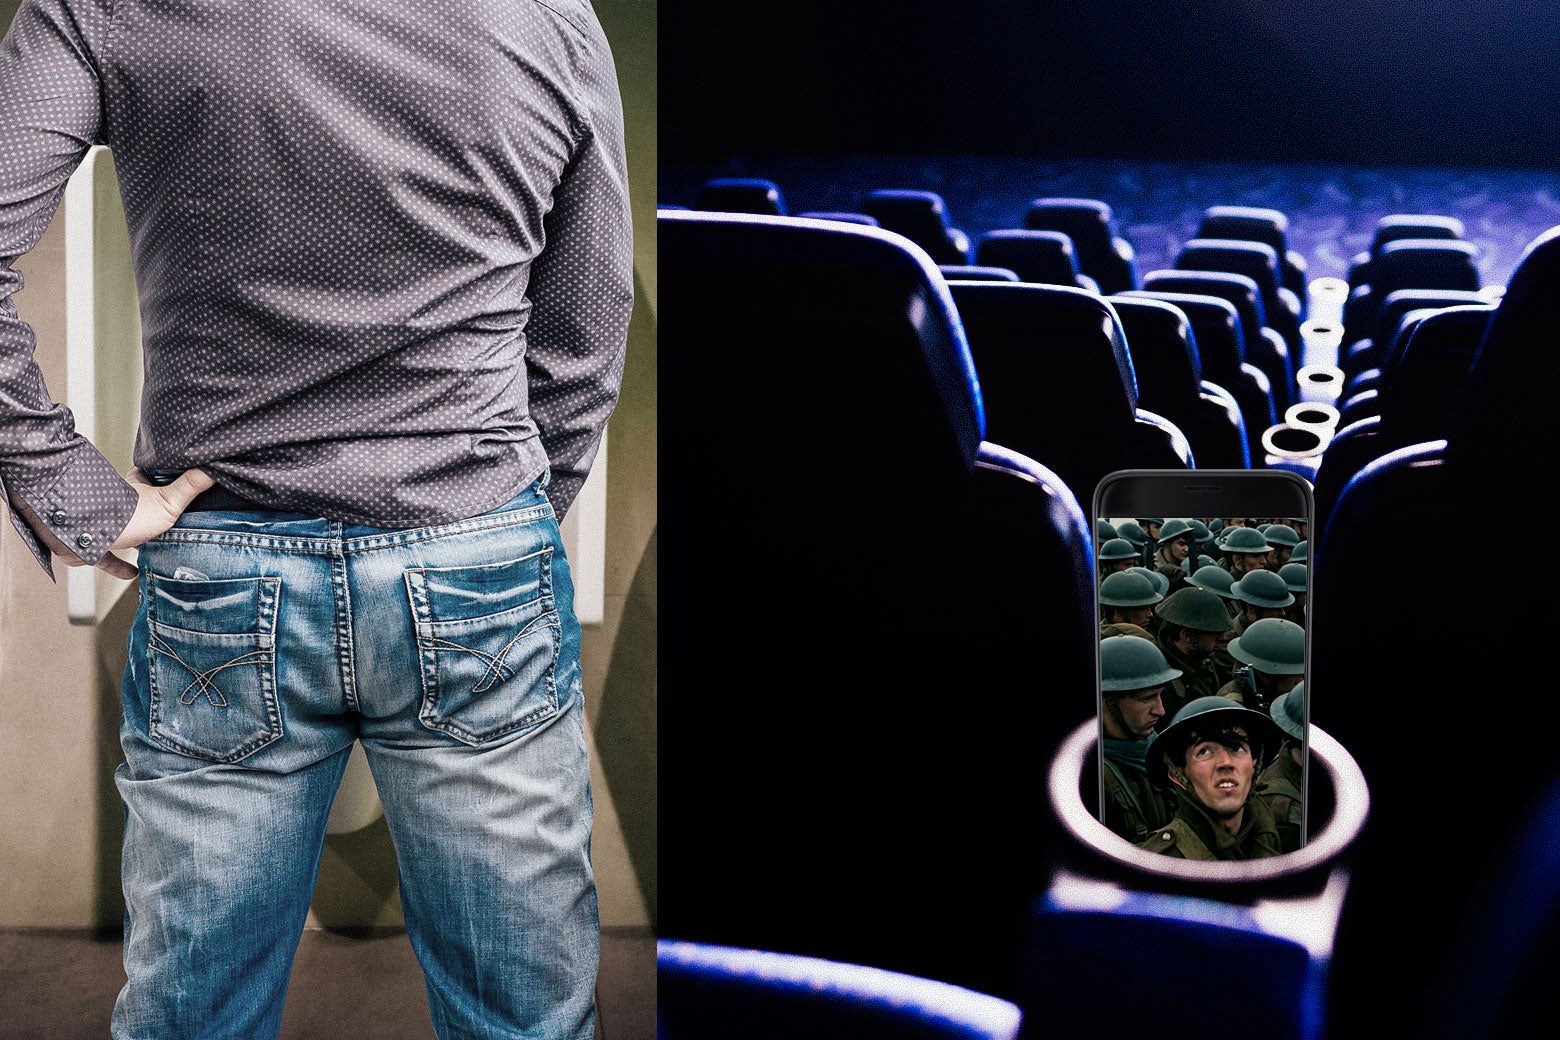 Photo illustration: A man stands in front of a urinal as a split-screen image shows his cellphone with a scene from Dunkirk on it in the theater.